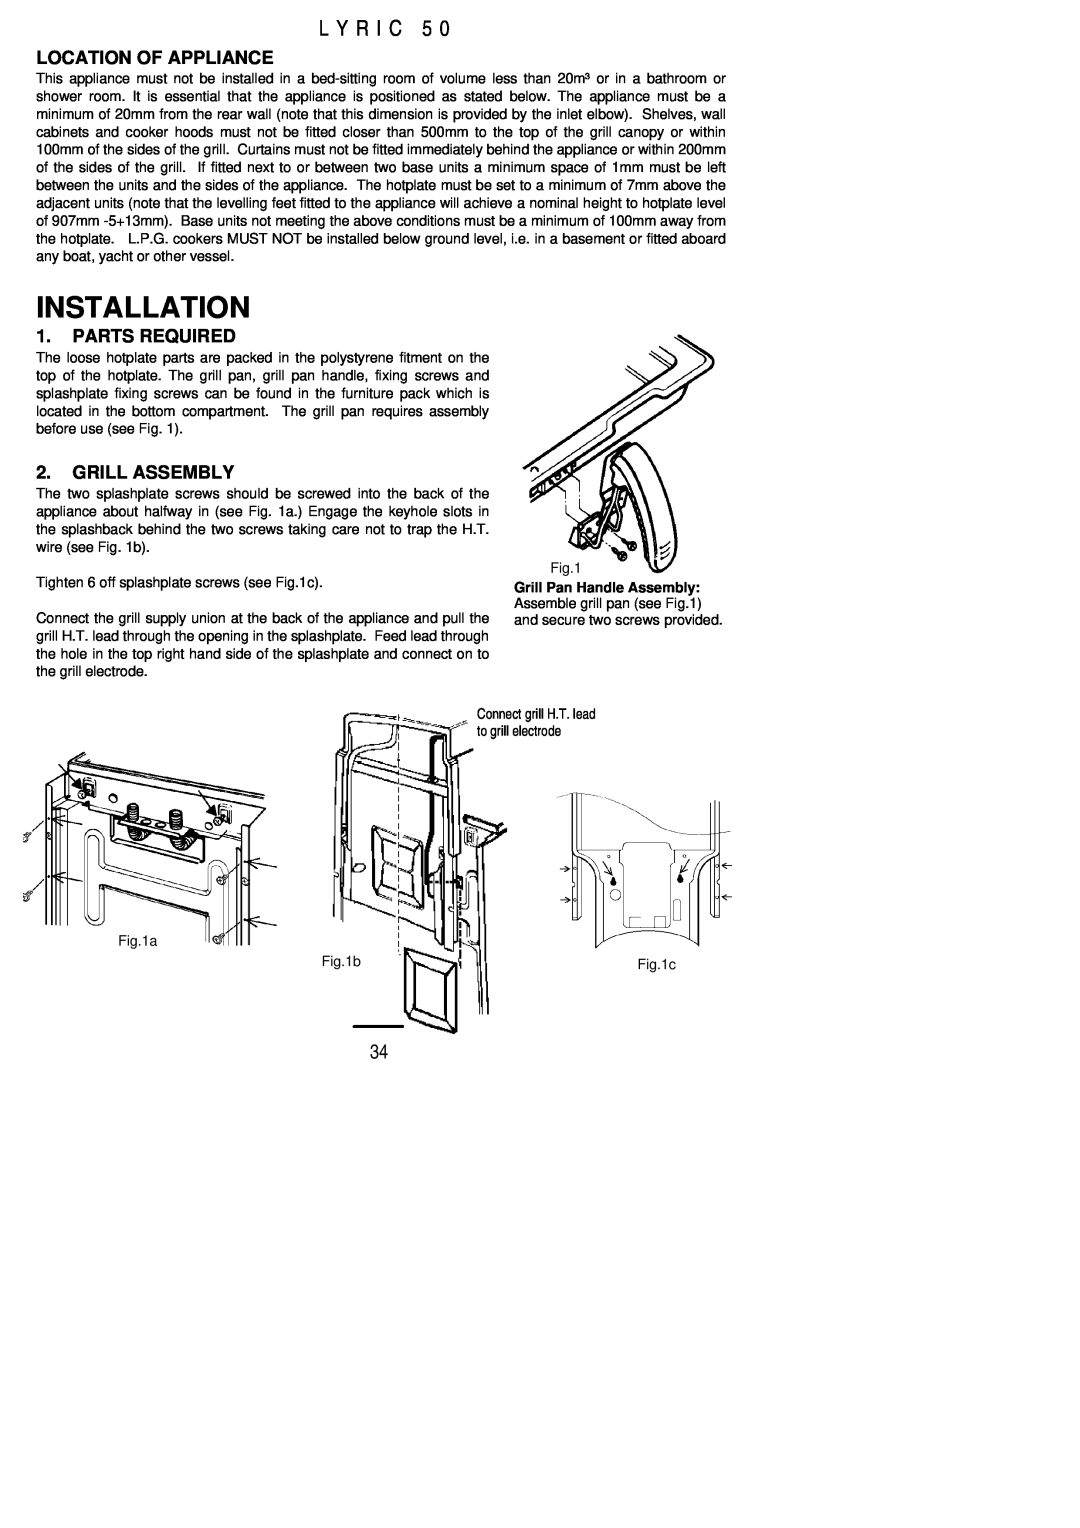 Electrolux Lynic 50 Installation, L Y R I C, Location Of Appliance, Parts Required, Grill Assembly 